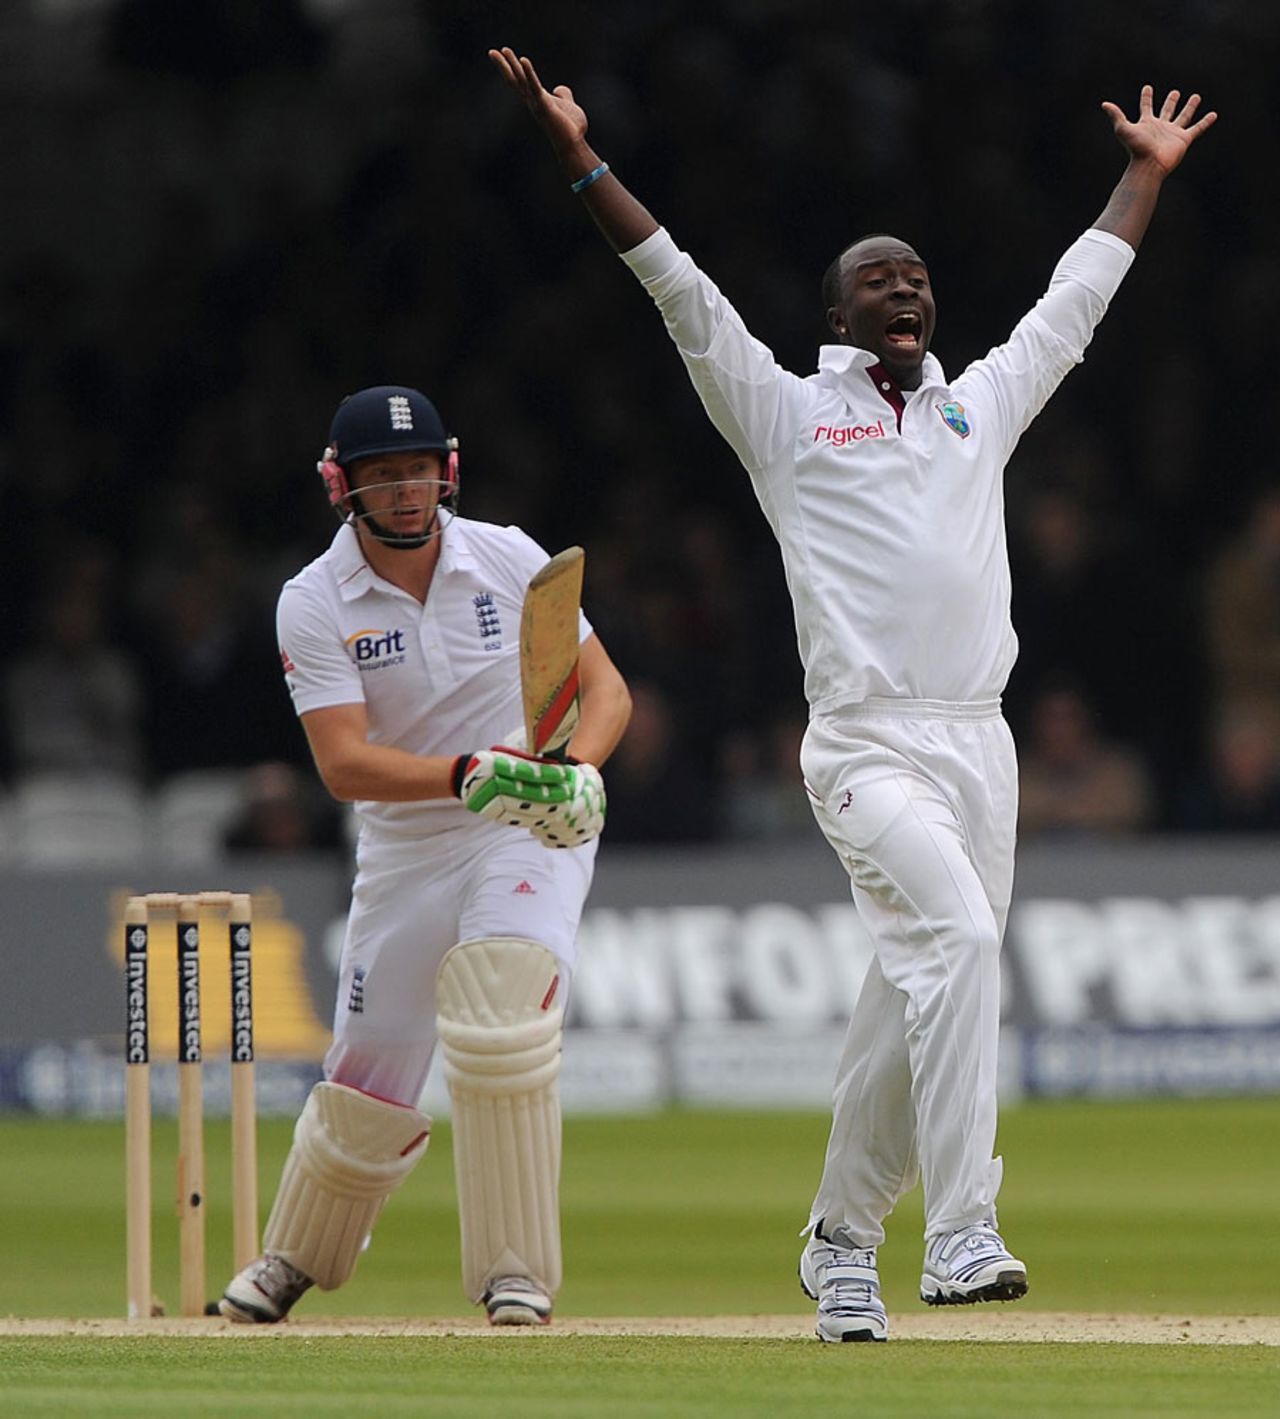 Jonny Bairstow was trapped lbw by Kemar Roach, England v West Indies, 1st Test, Lord's, 3rd day, May 19, 2012